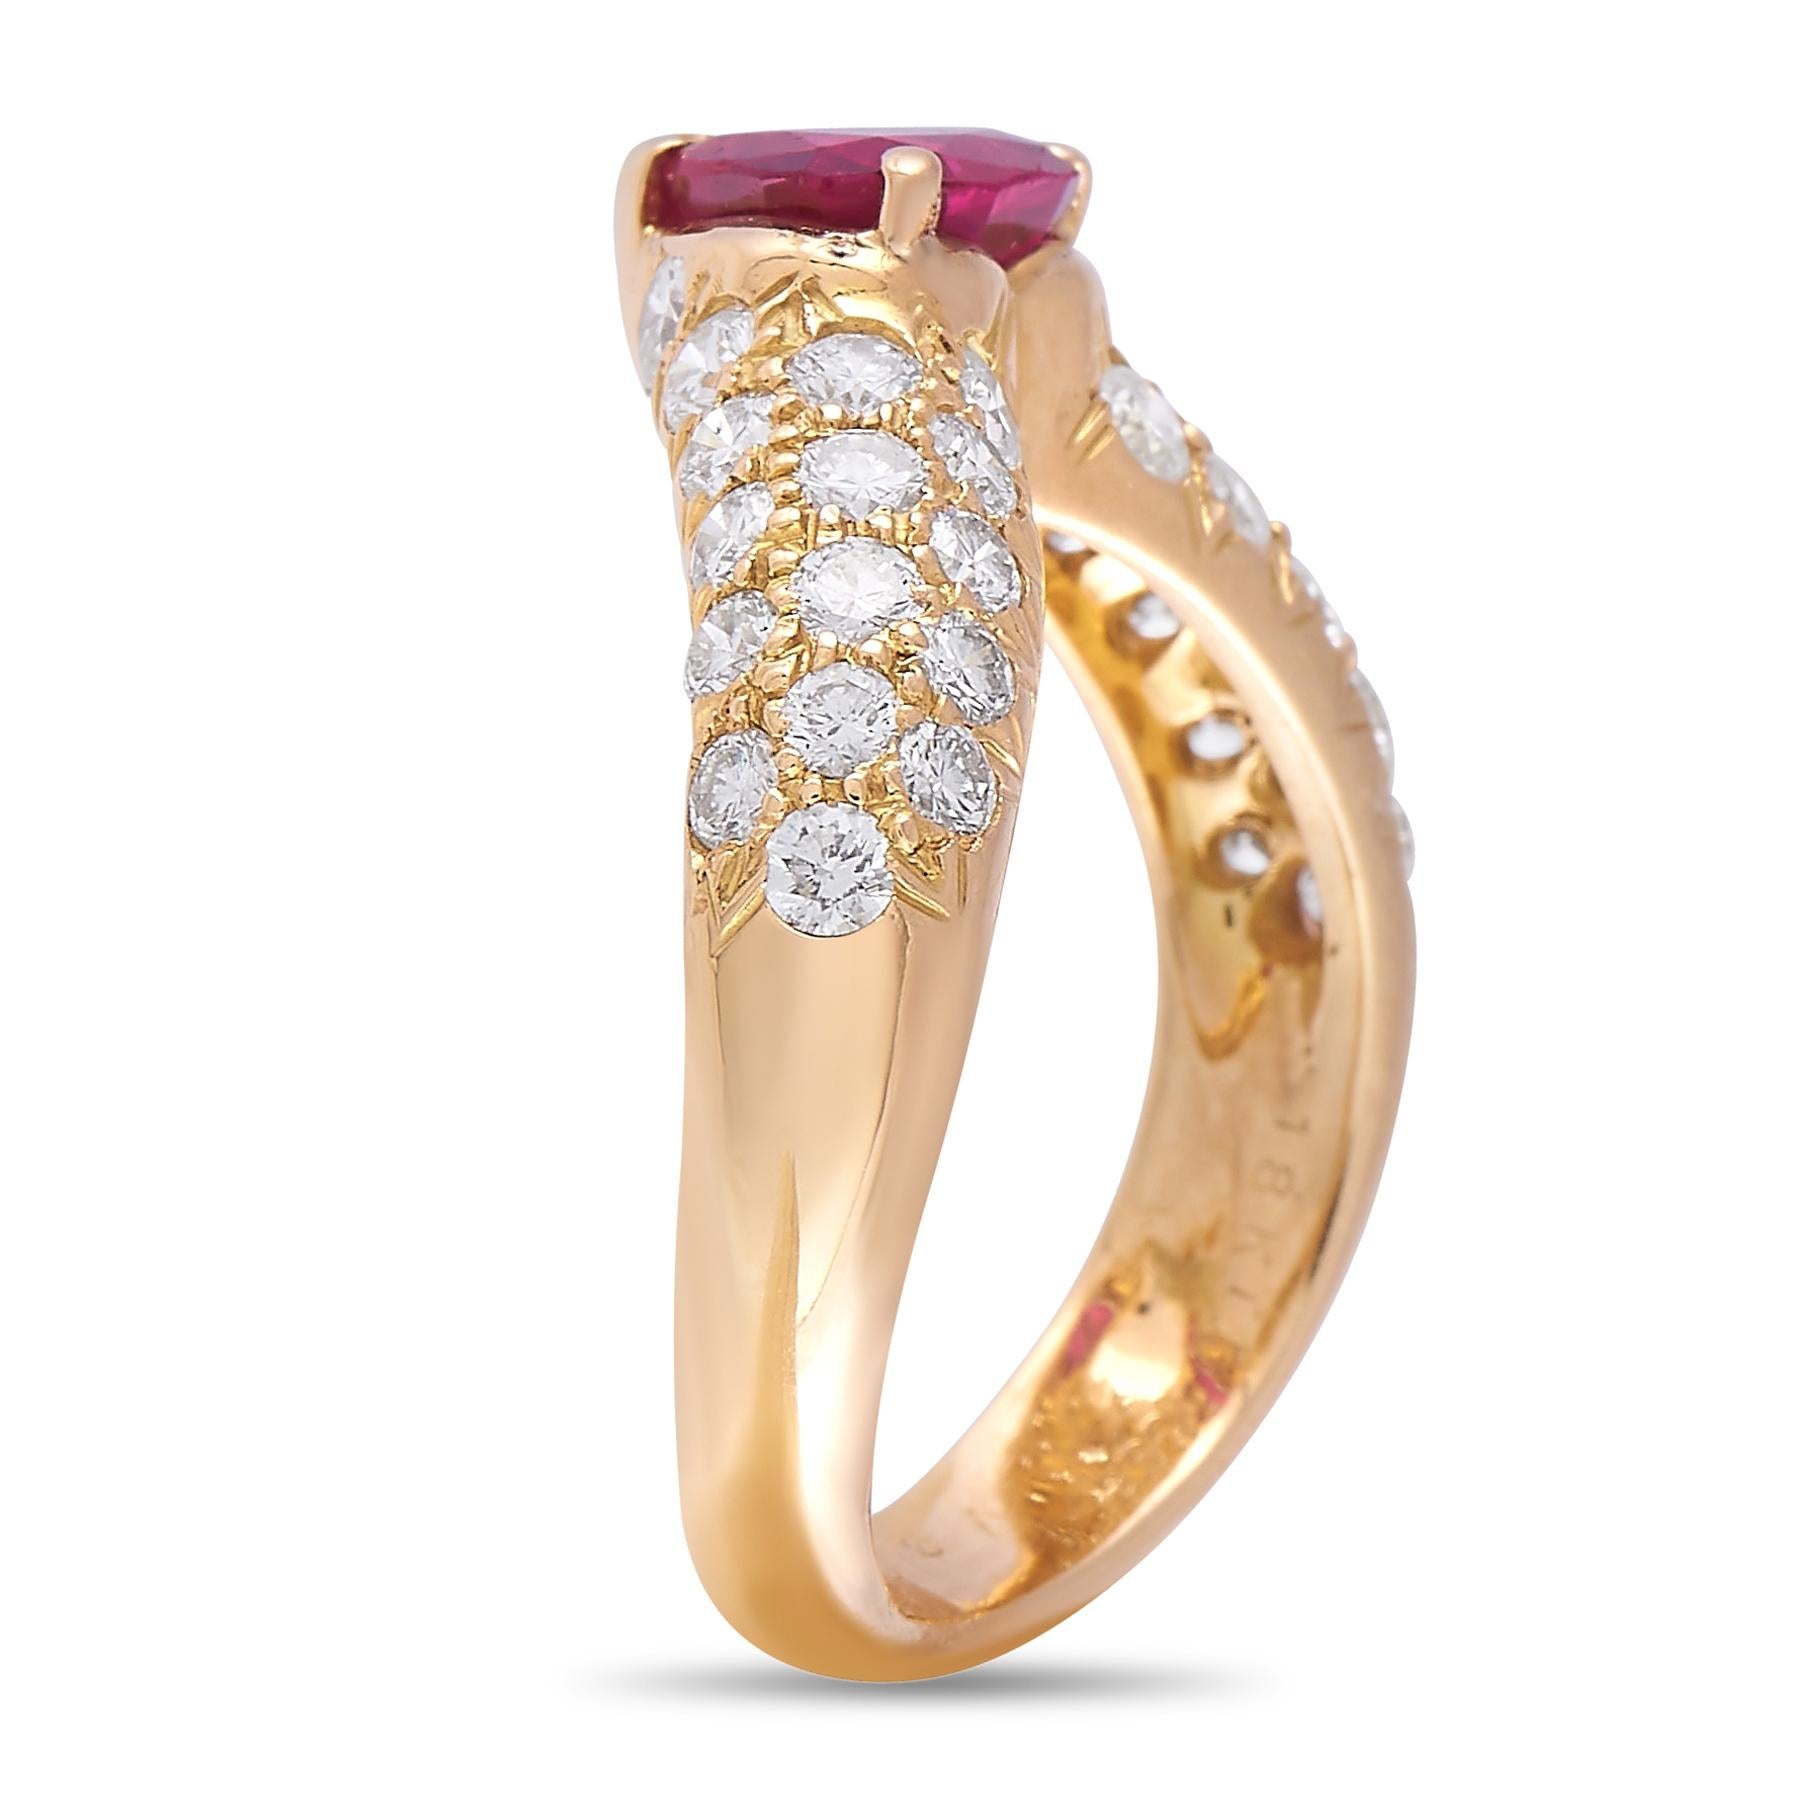 This ring from Van Cleef & Arpels exudes the brand’s classic sense of luxury. This V-shaped ring’s stylish 18K yellow gold setting is elevated by the presence of a 1.17 carat ruby center stone as well as glittering diamonds totaling 1.09 carats.